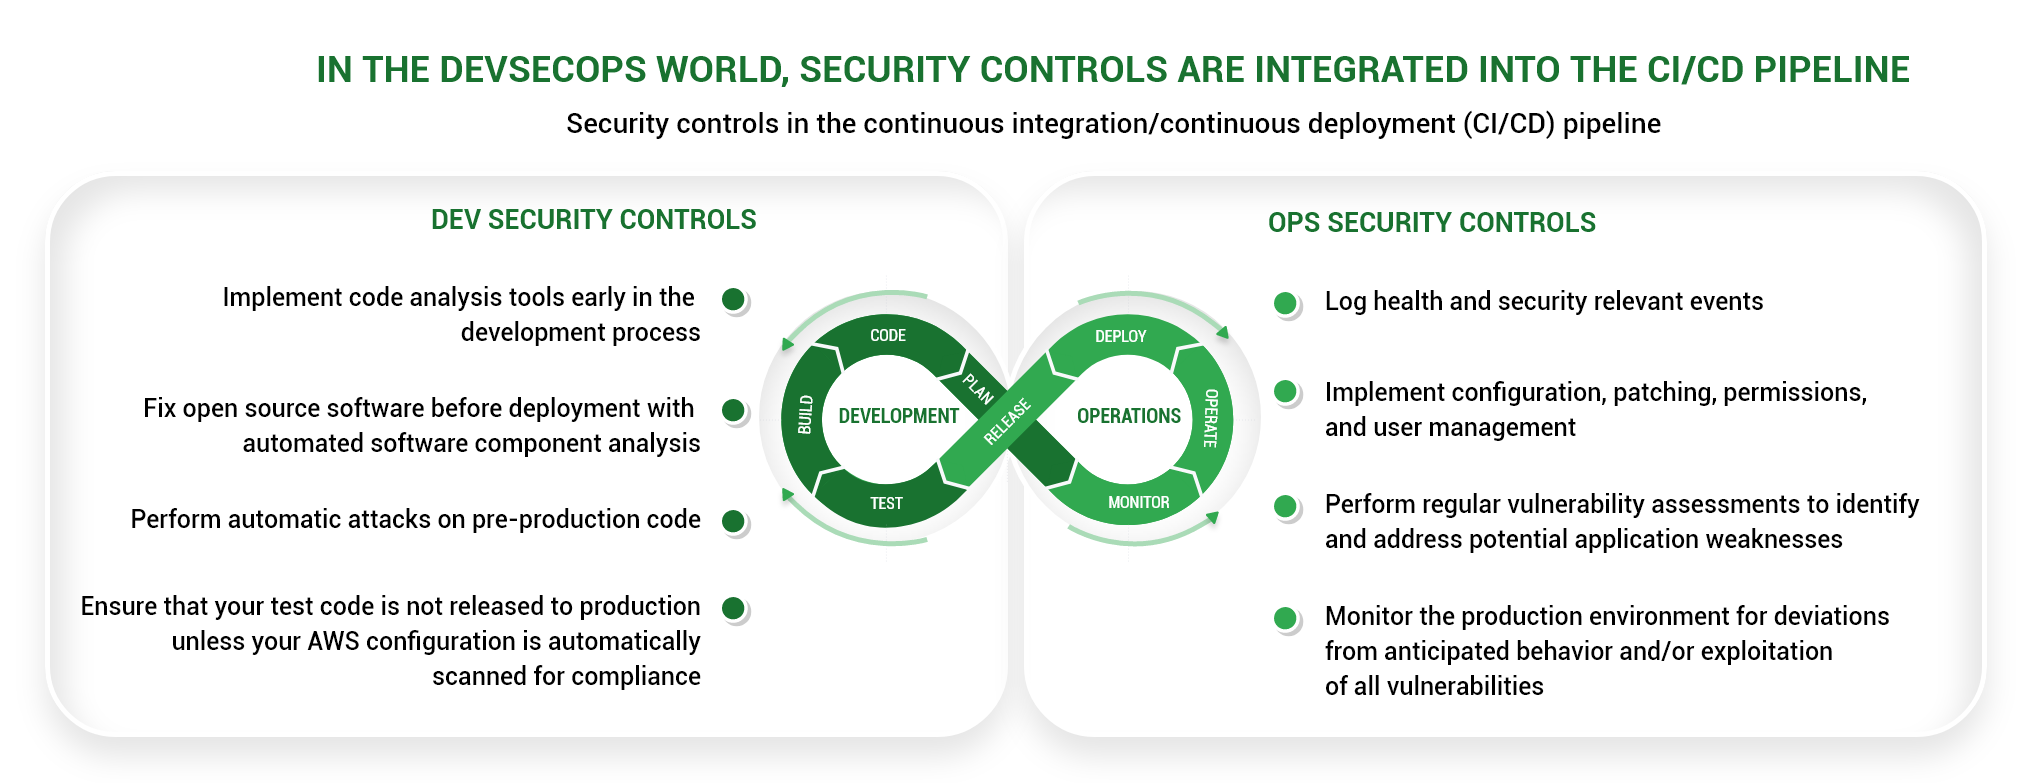 In the DevSecOps world, security controls